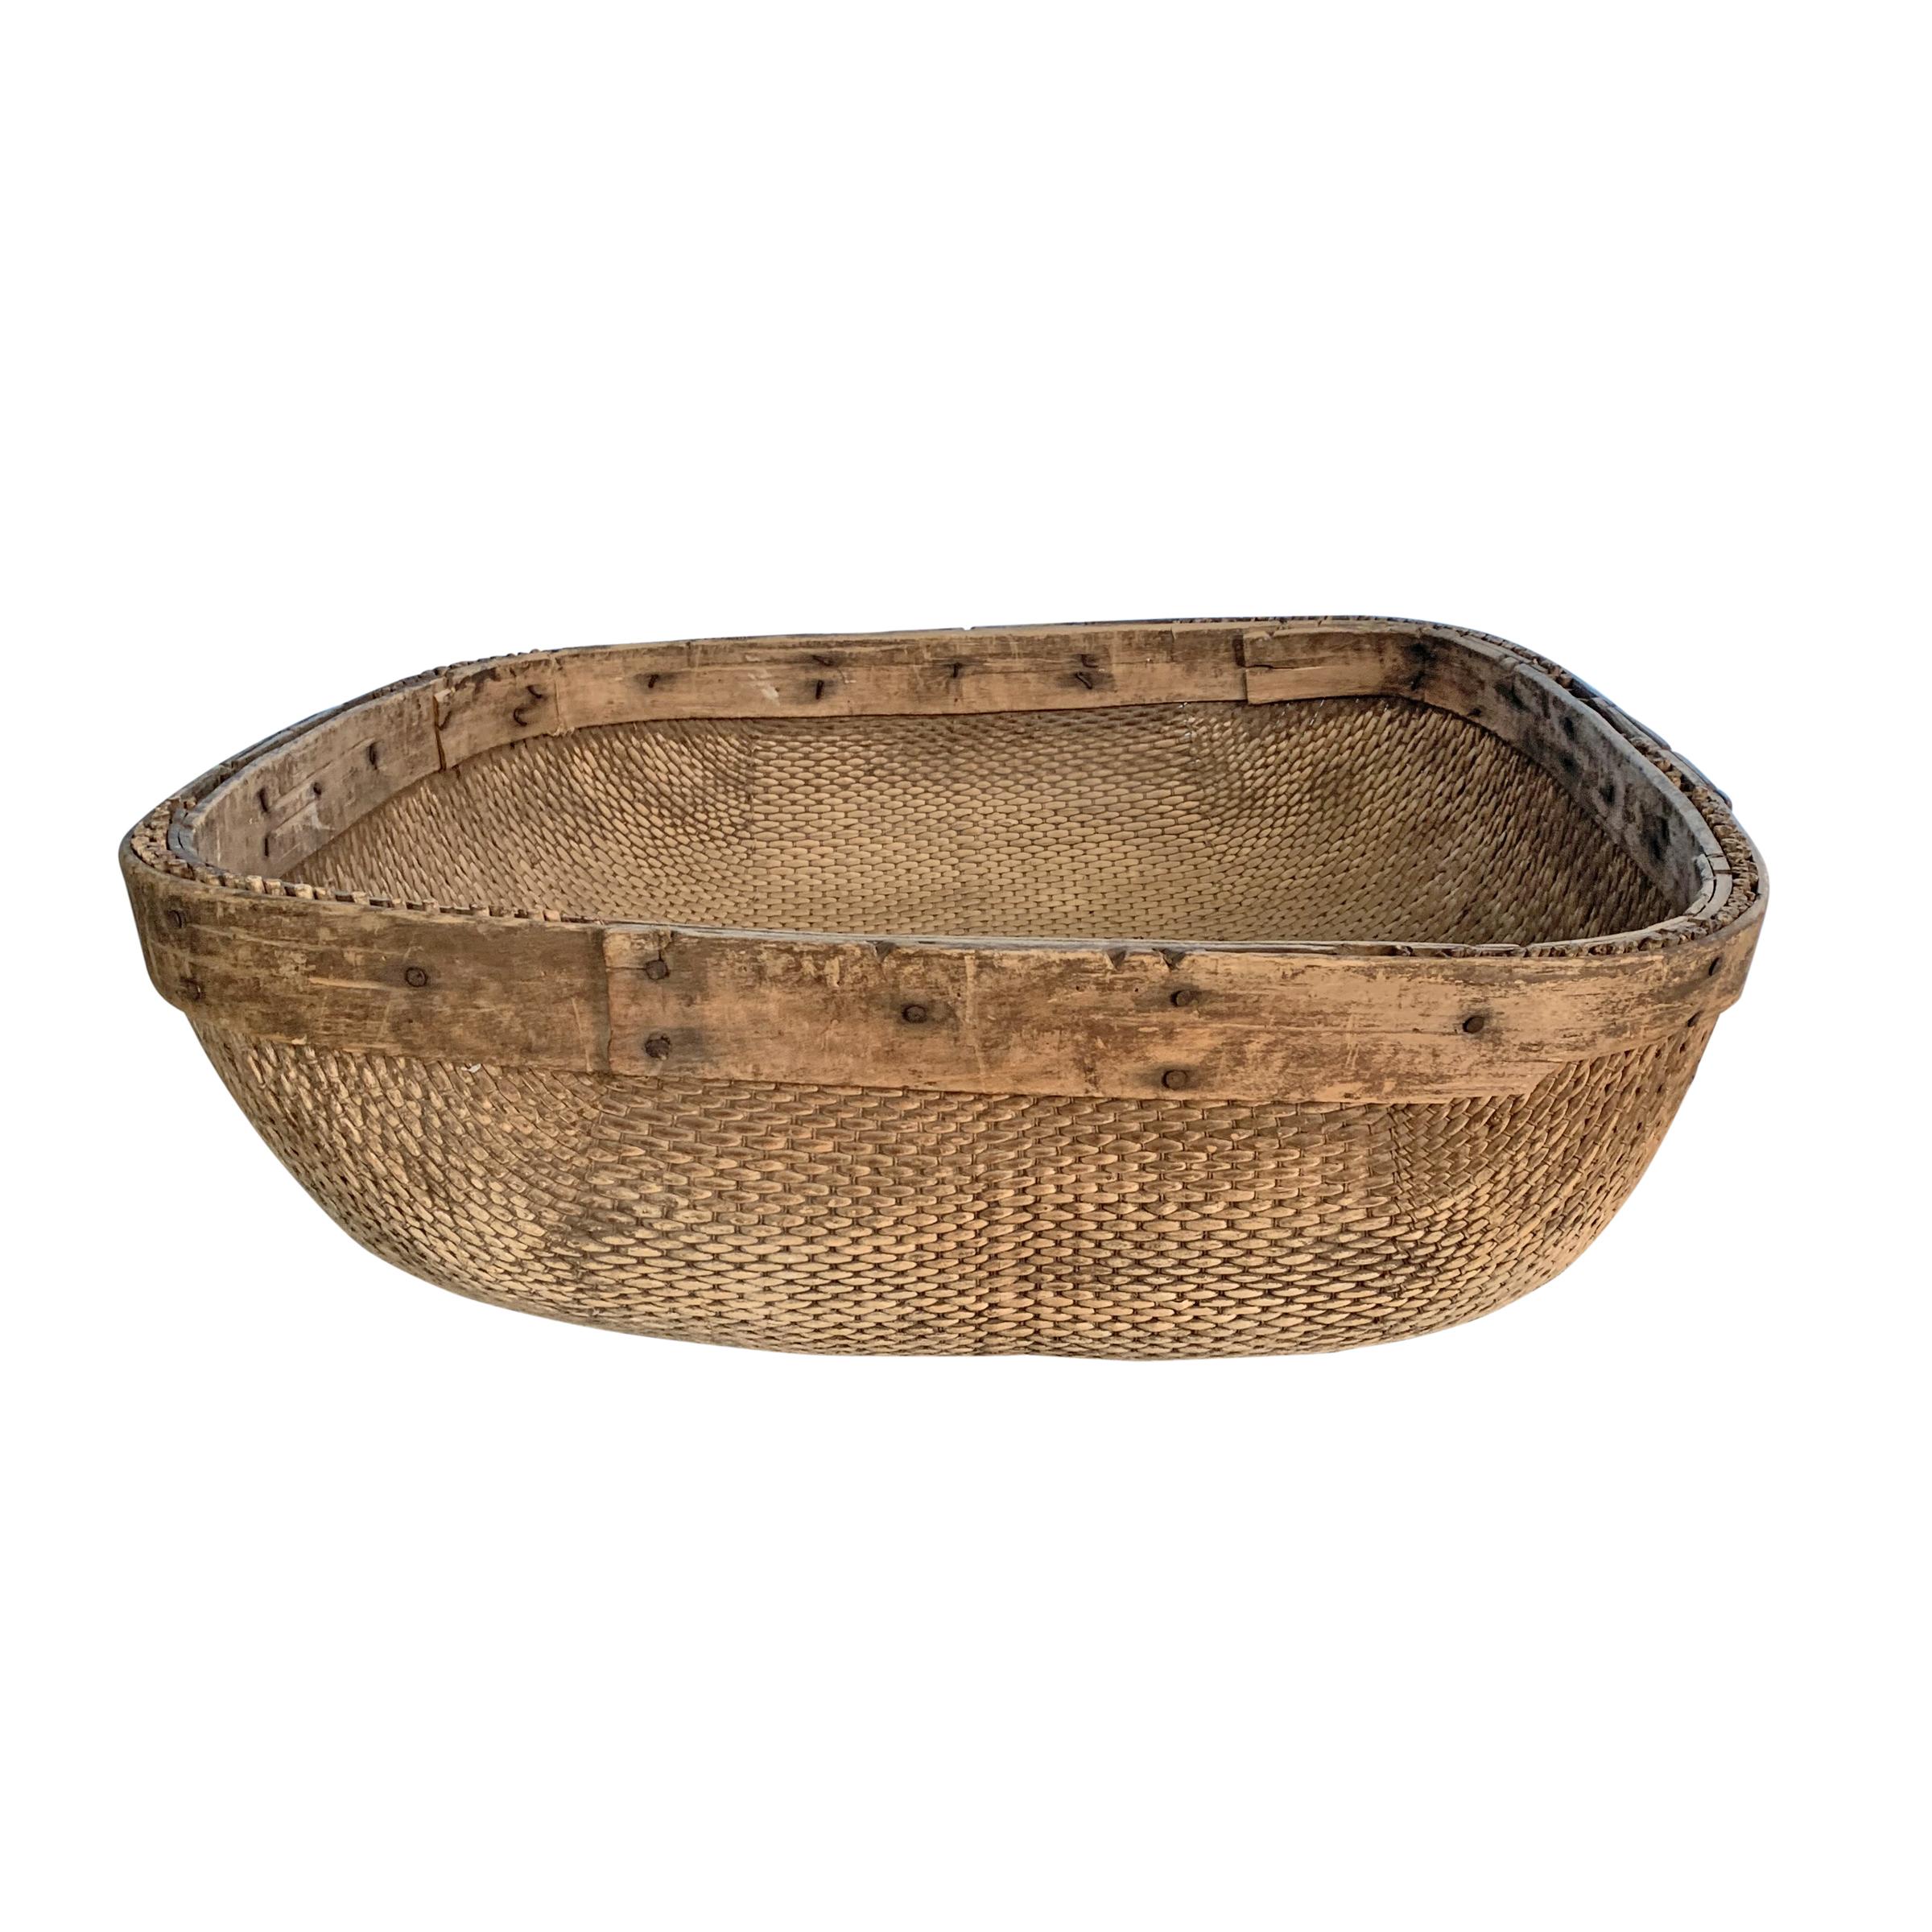 Hand-Woven Early 20th Century Chinese Winnowing Basket